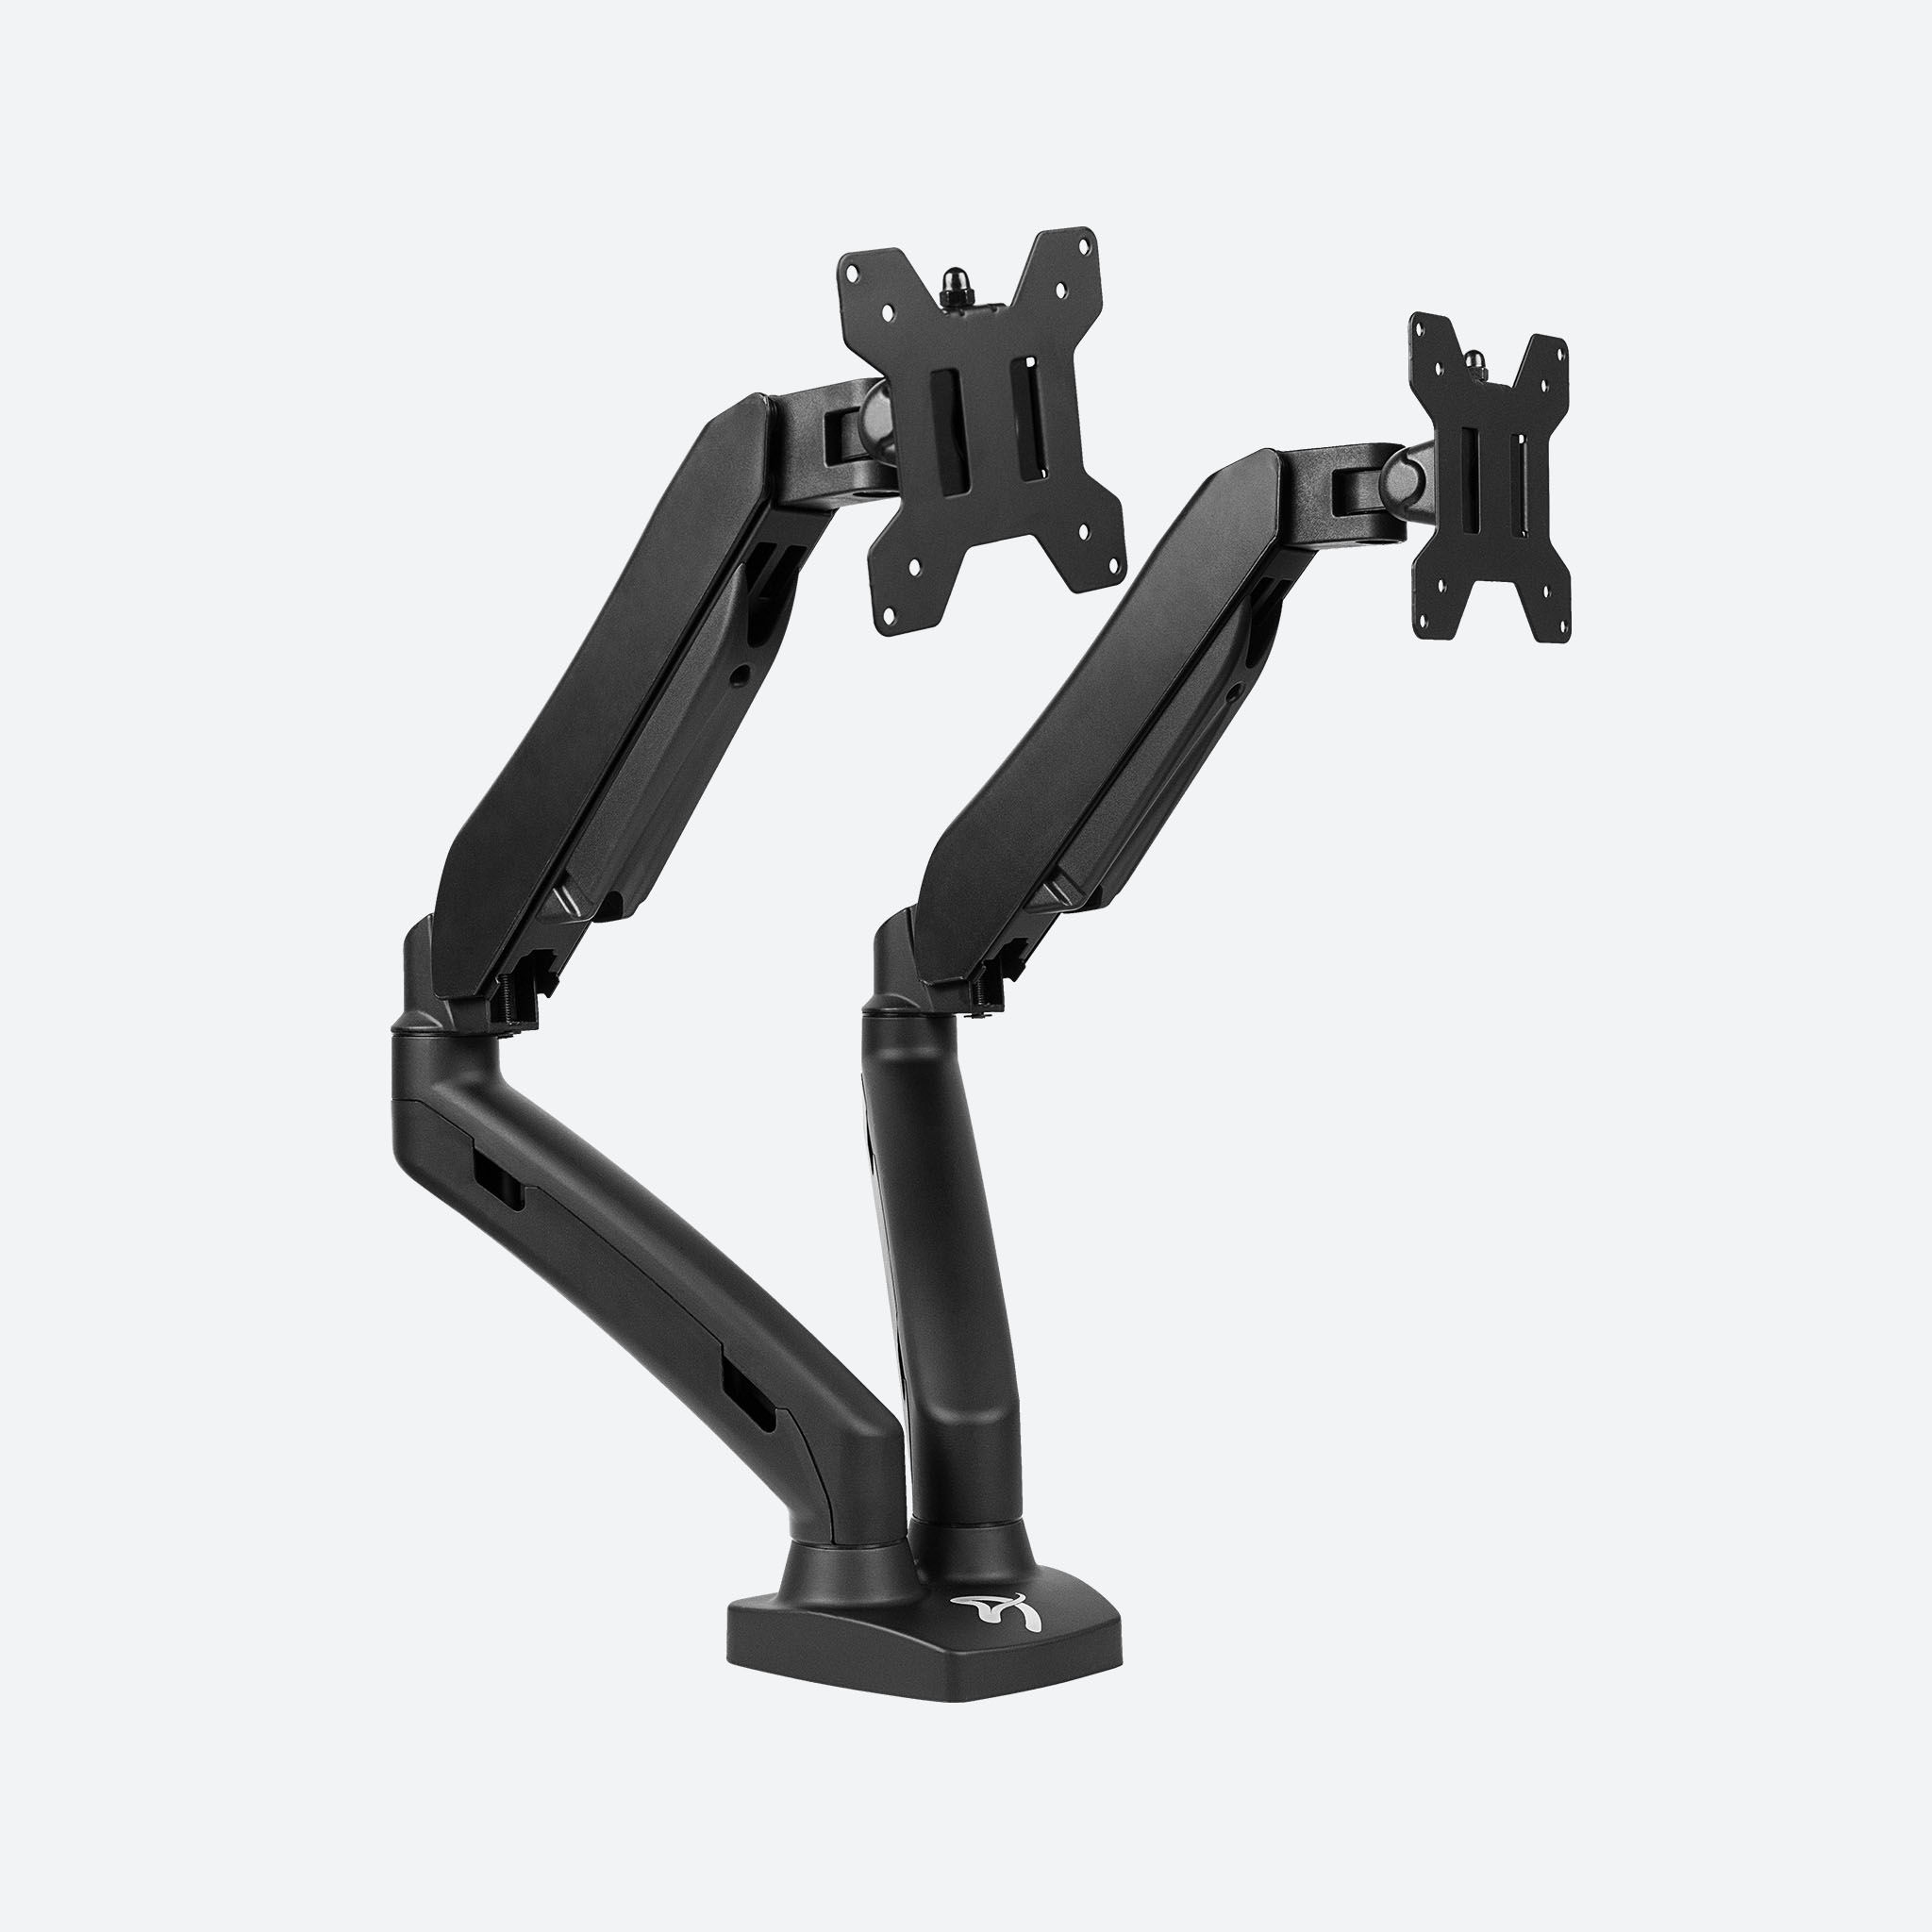 Arozzi Alzare Monitor Arm Assembly Guide 